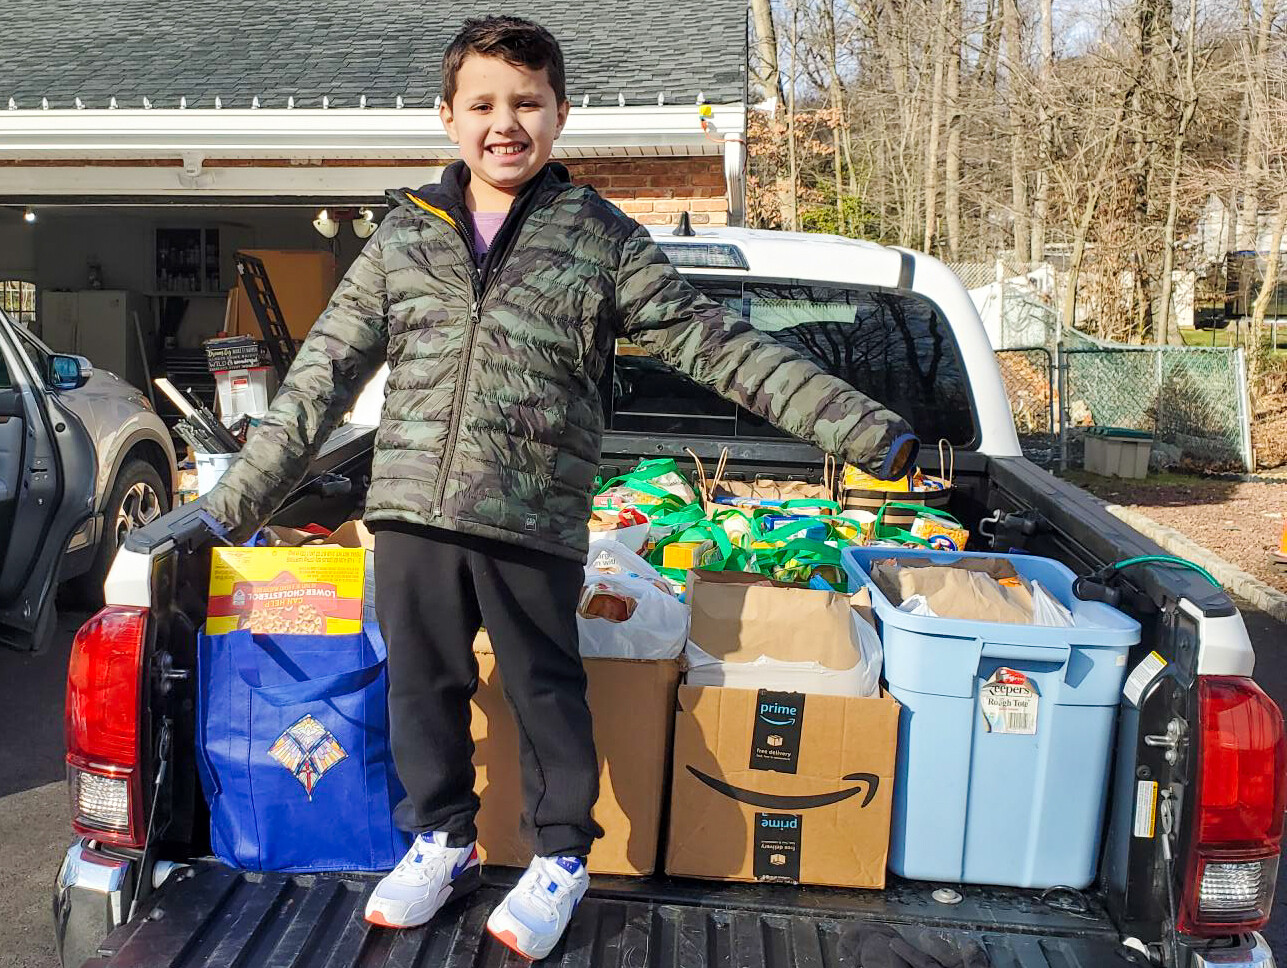 With help from his Denville, N.J. community, Dante Olshefski spearheaded a food drive to benefit Mercy House, a family-oriented resource and referral center in the heart of Newark.